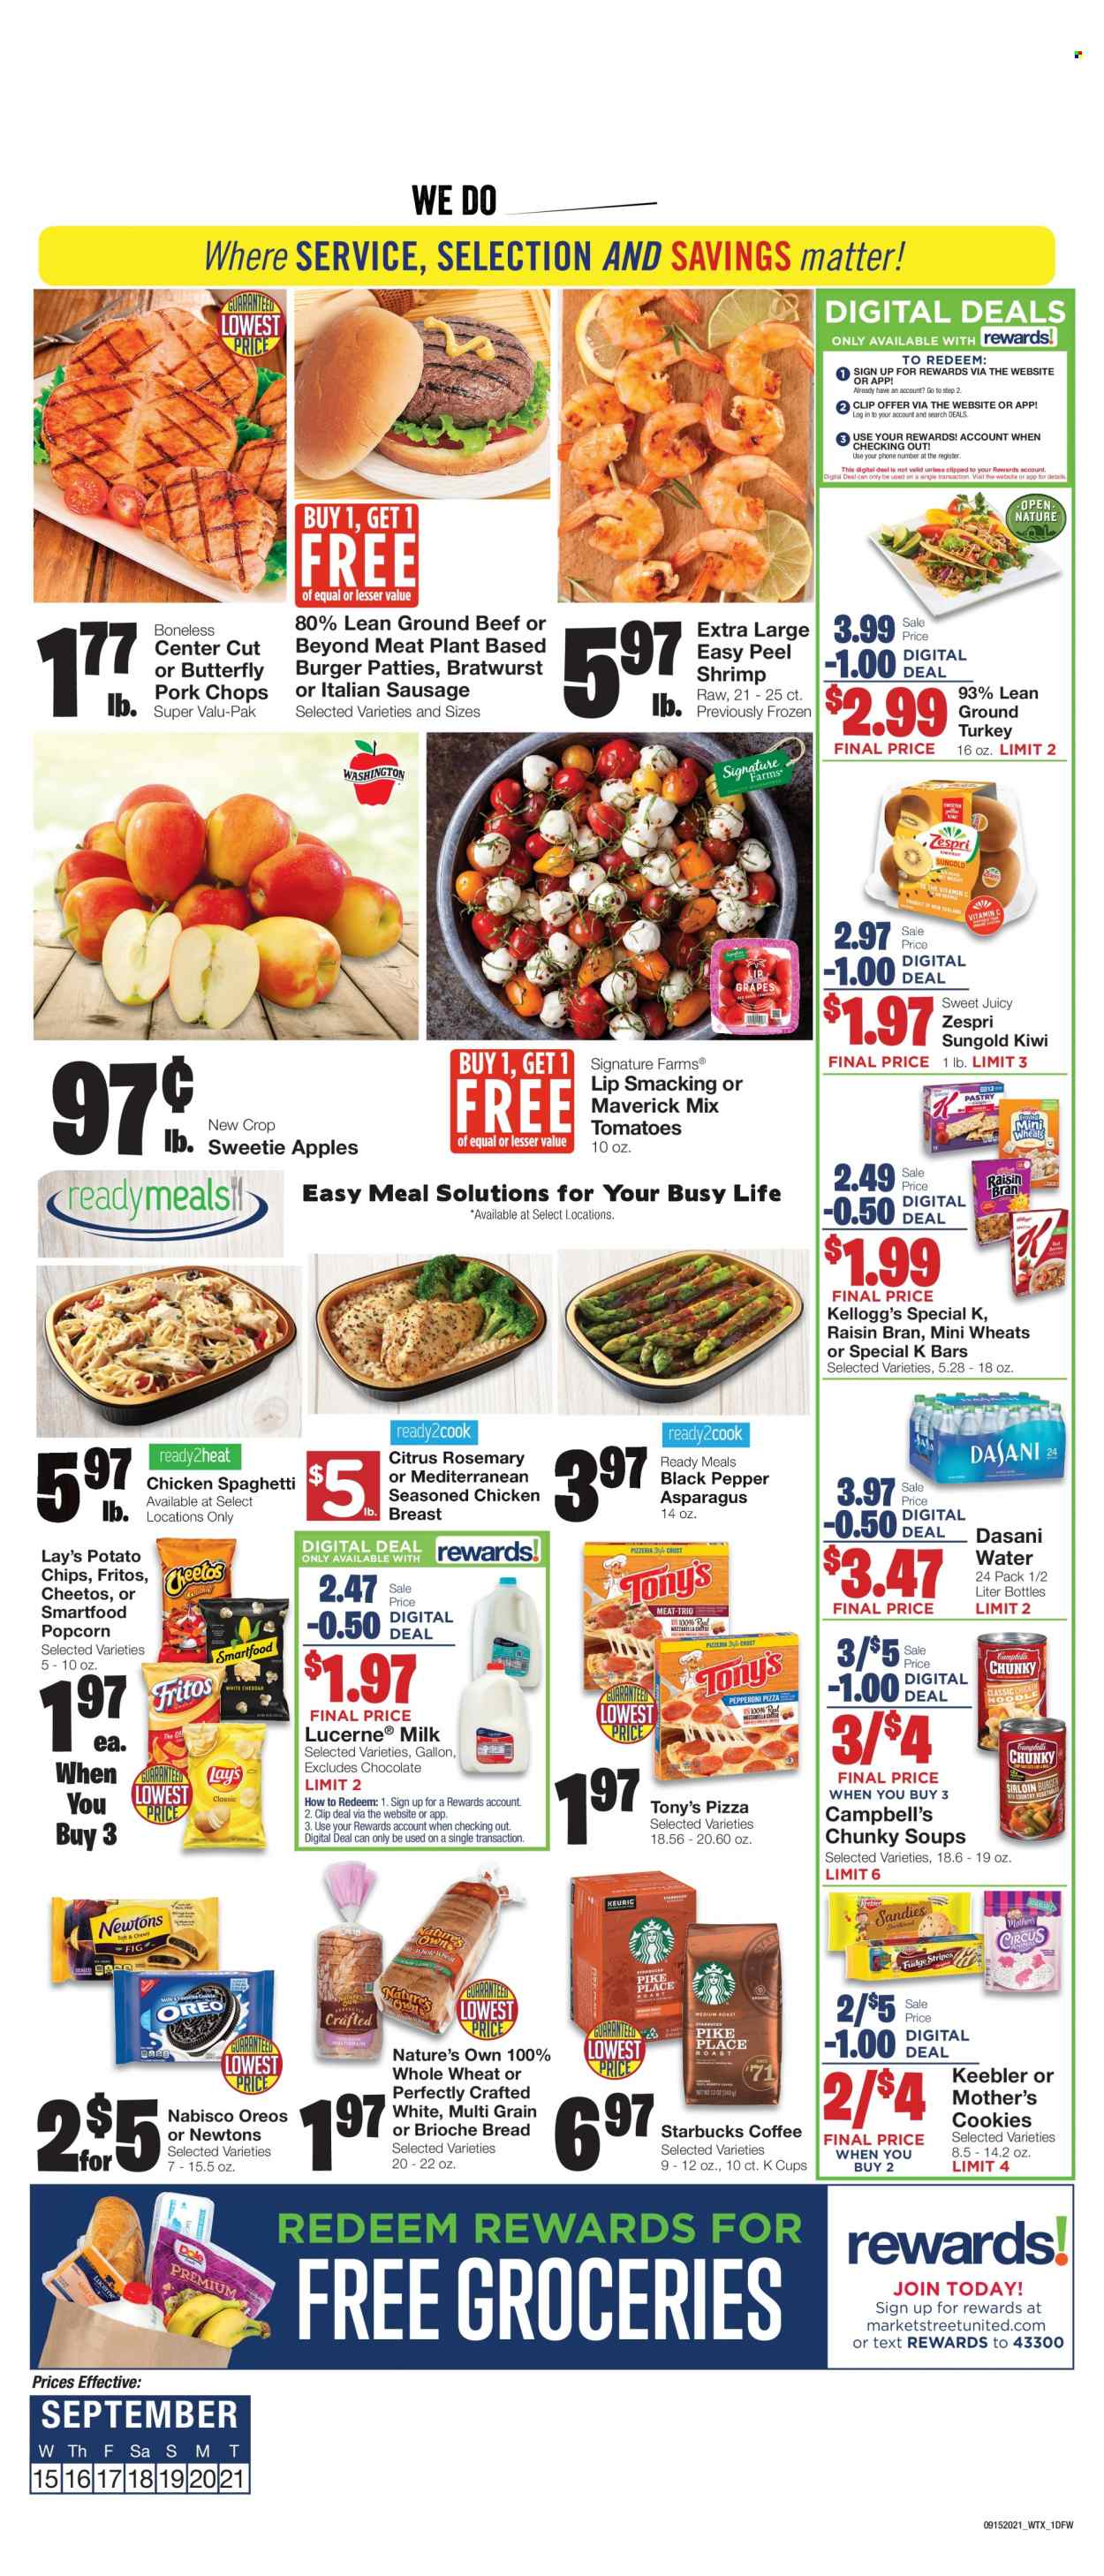 thumbnail - Market Street Flyer - 09/15/2021 - 09/21/2021 - Sales products - bread, brioche, asparagus, Dole, apples, grapes, kiwi, shrimps, Campbell's, spaghetti, pizza, hamburger, noodles, bratwurst, sausage, italian sausage, Oreo, milk, cookies, chocolate, Kellogg's, Keebler, Fritos, potato chips, Cheetos, Lay’s, Smartfood, Raisin Bran, rosemary, black pepper, coffee, Starbucks, coffee capsules, K-Cups, whole turkey, chicken breasts, beef meat, ground beef, burger patties, pork chops, pork meat, cup, vitamin c, Nature's Own. Page 1.